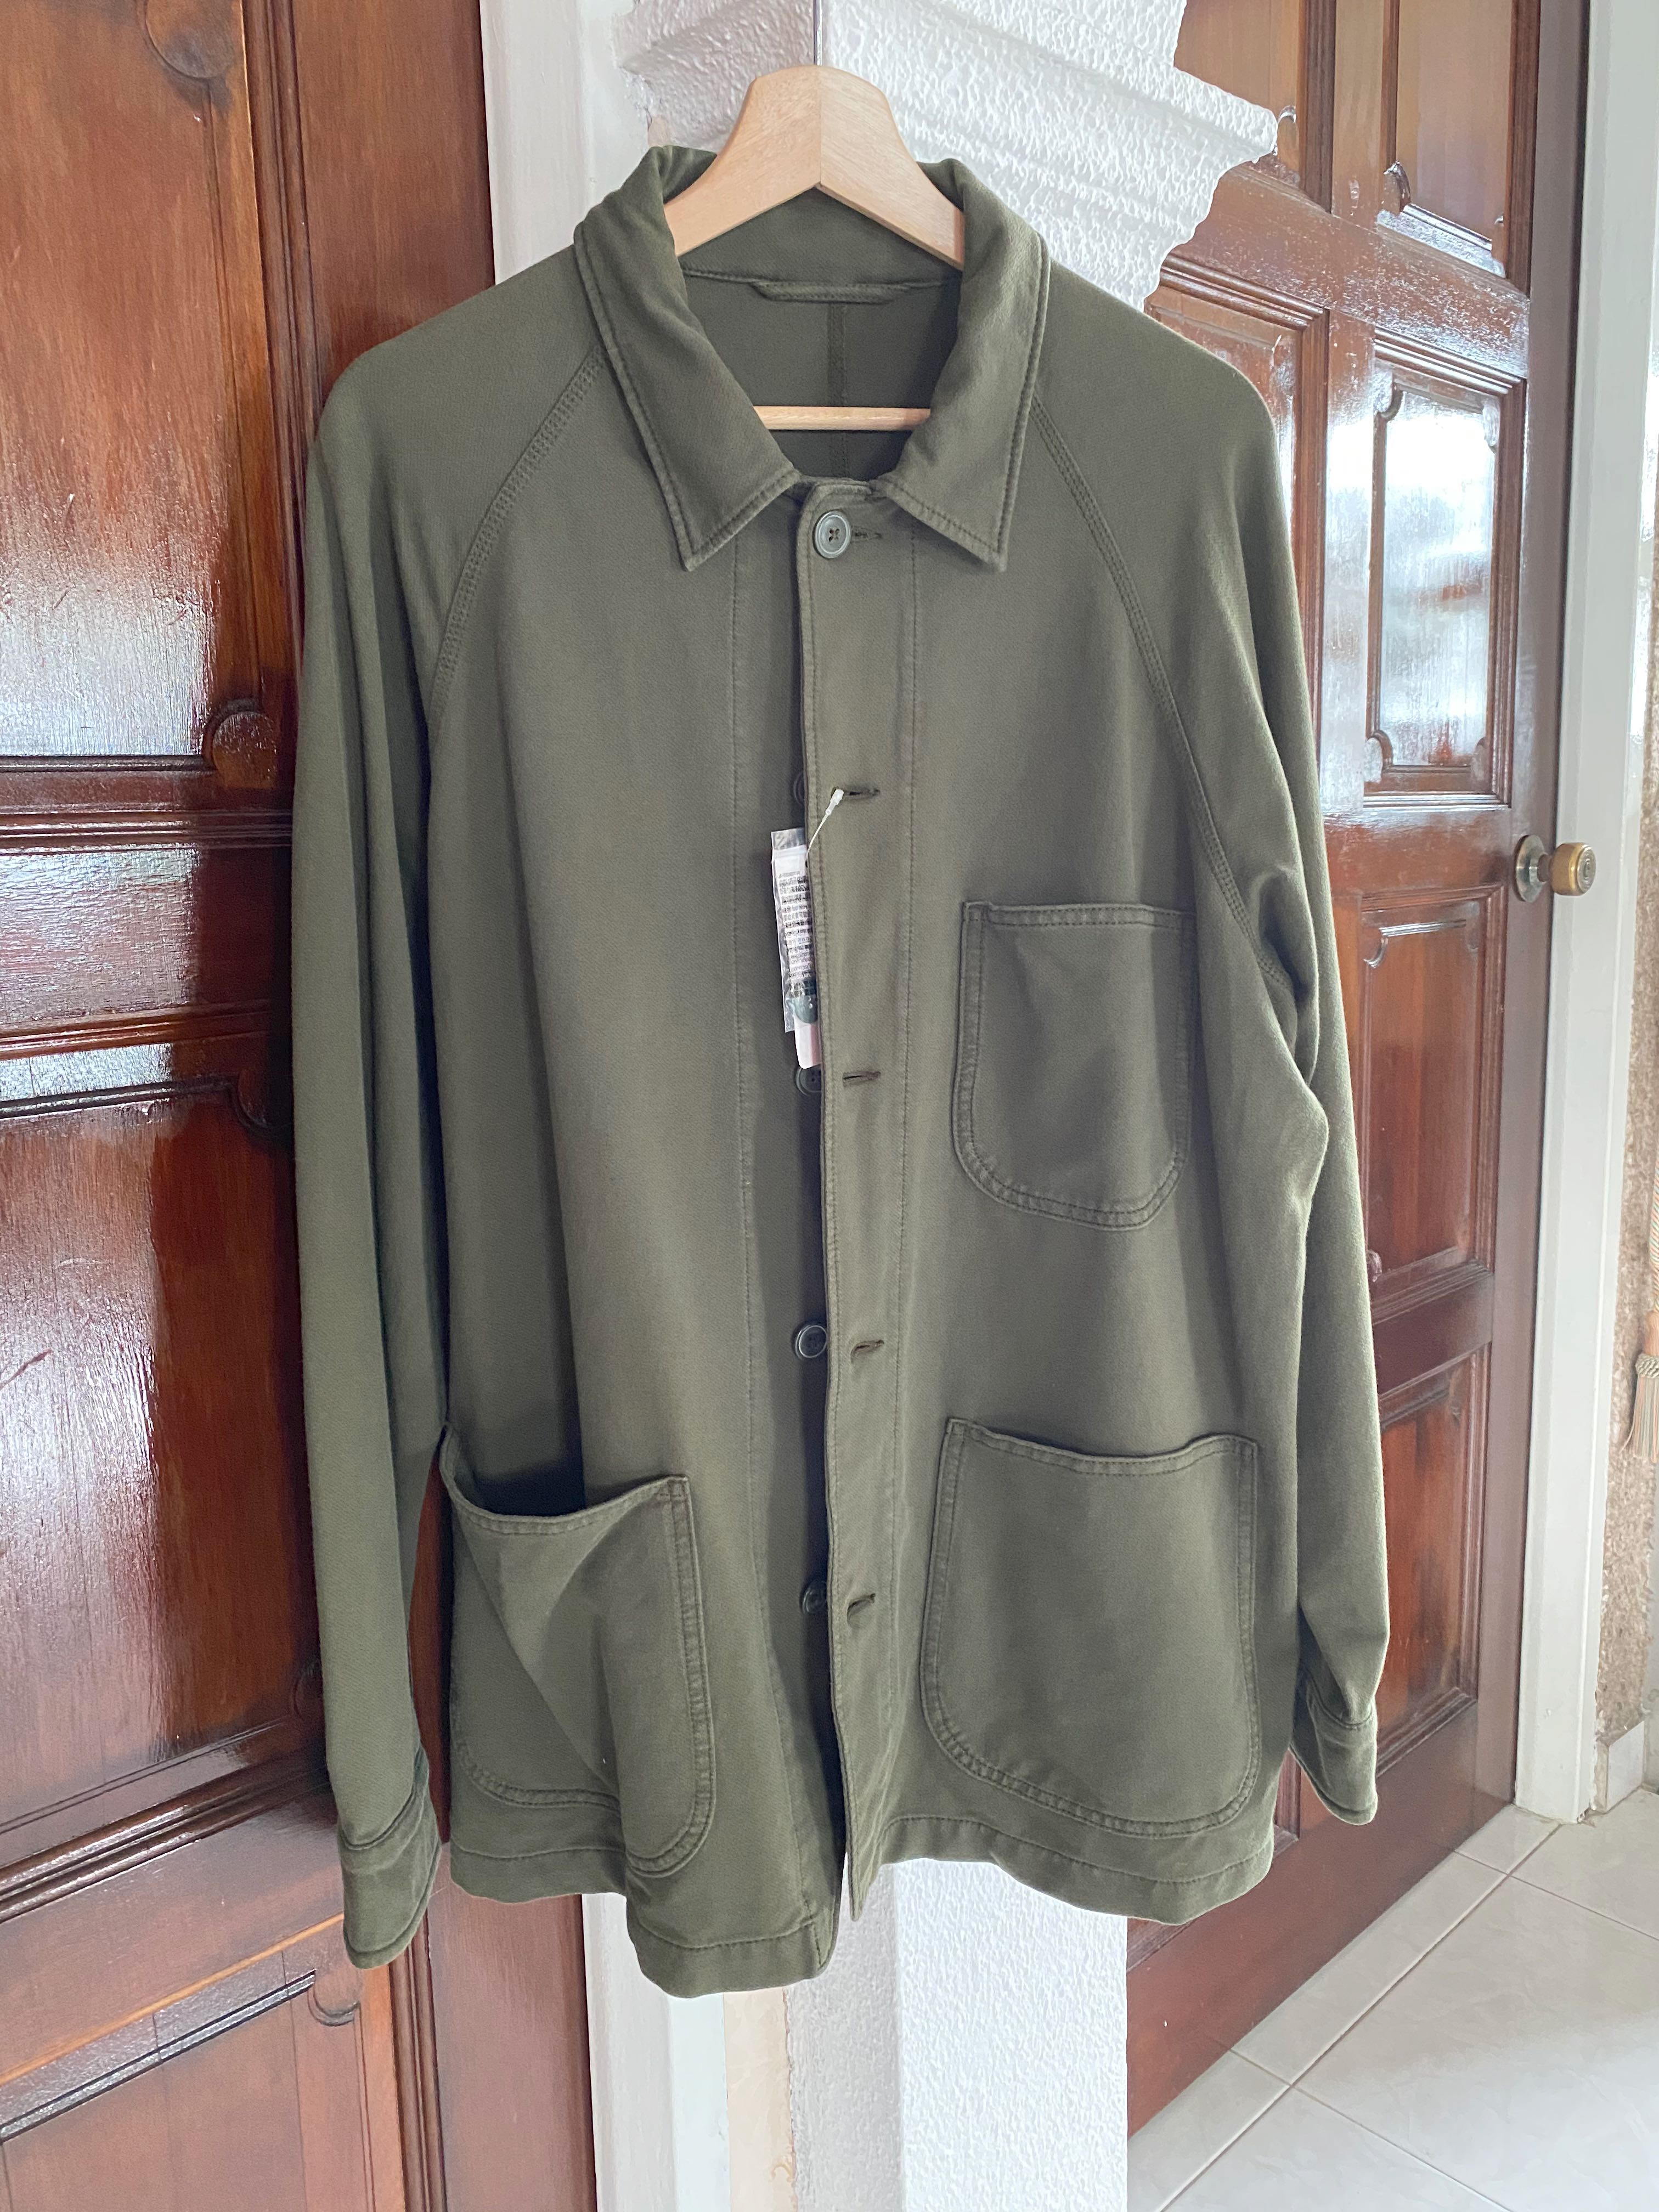 Uniqlo  Jackets  Coats  Uniqlo Olive Green Bomber Jacket Lightweight And  Perfect For Fall  Poshmark